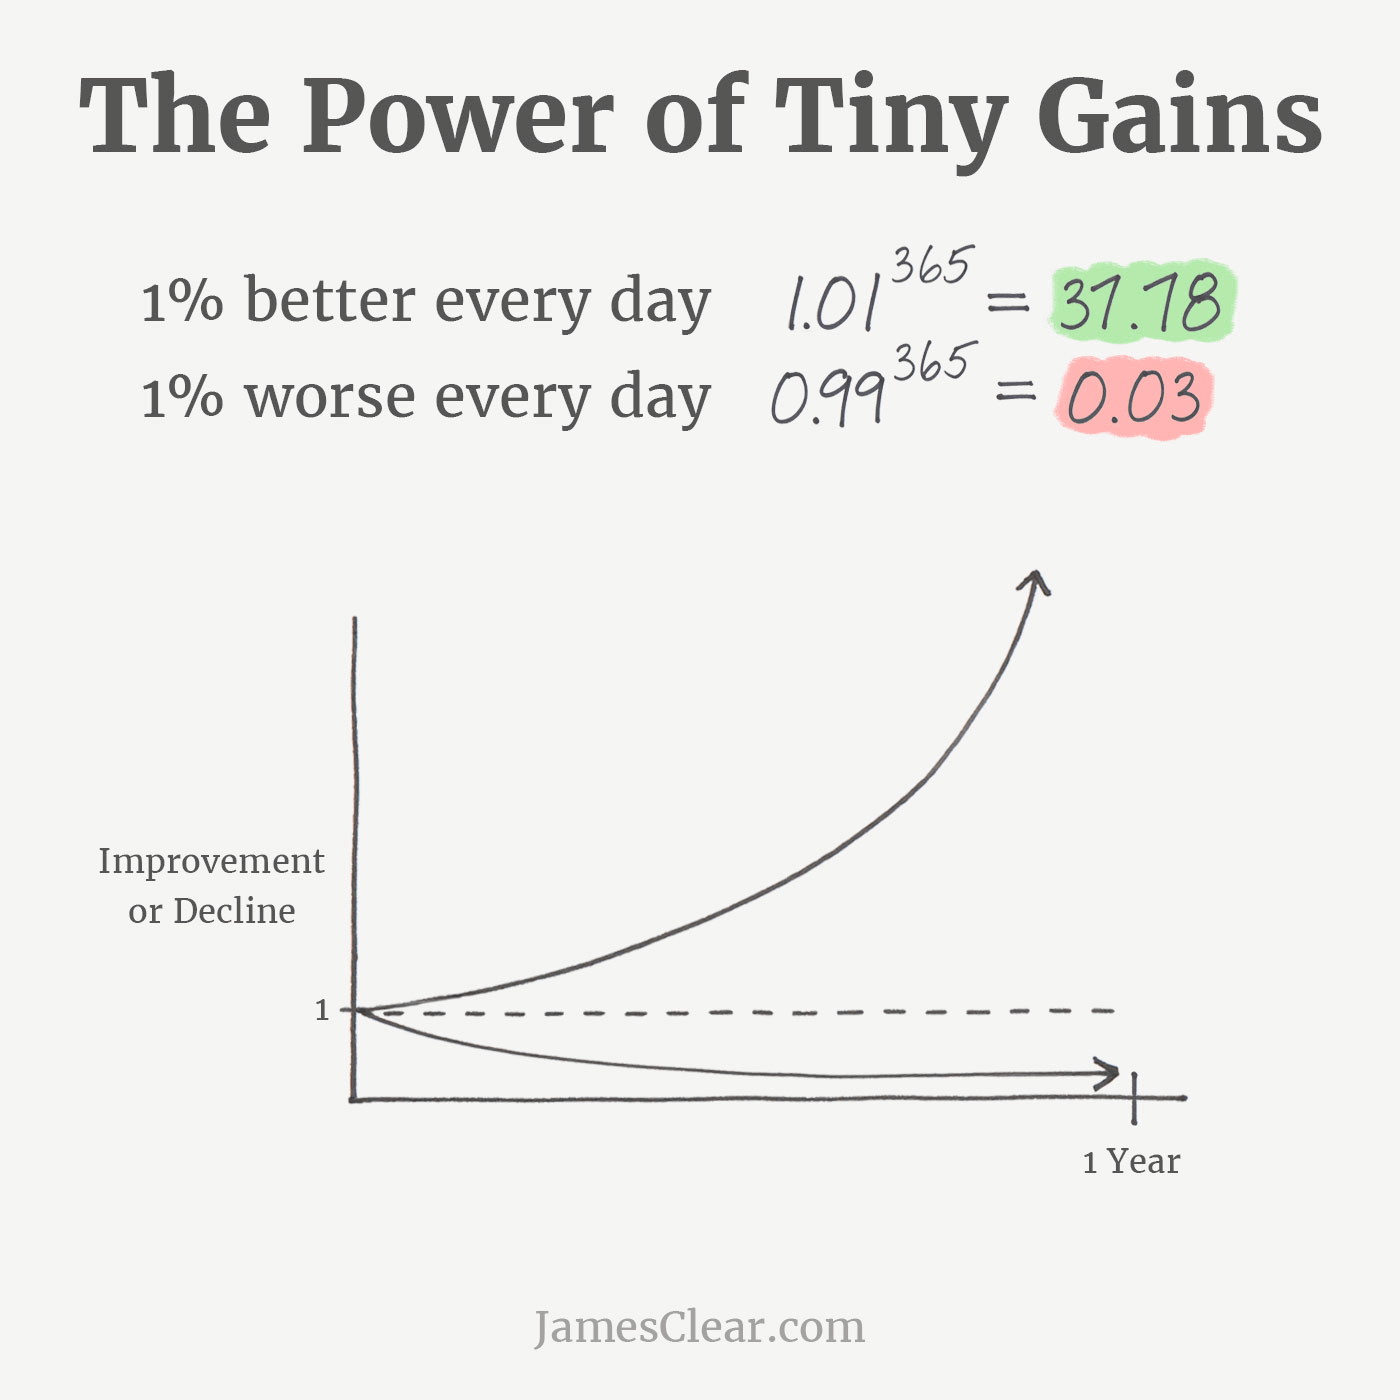 The power of getting 1% better every day